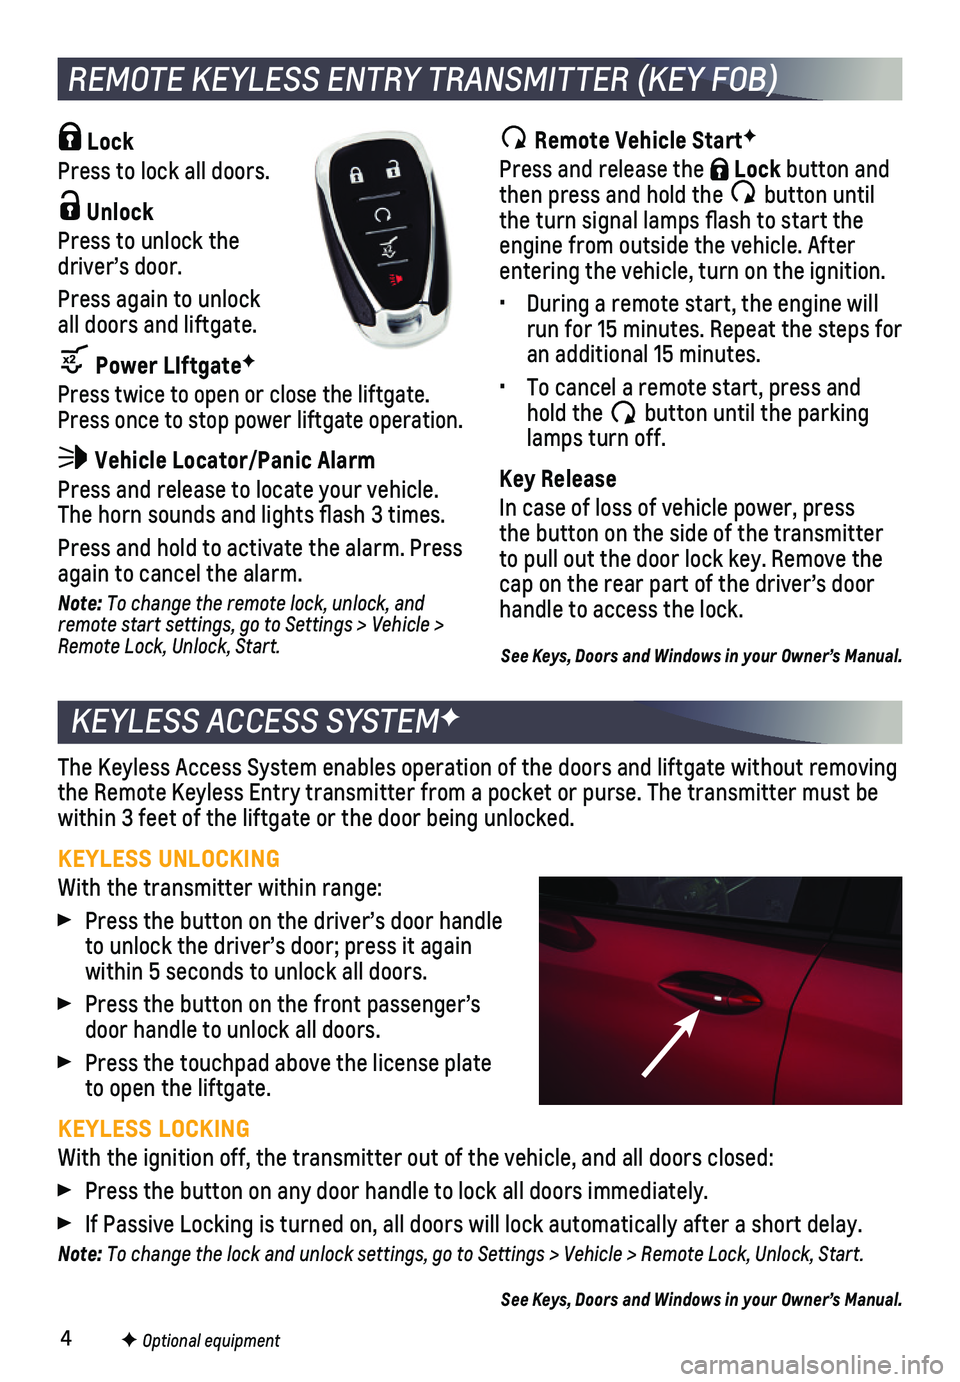 CHEVROLET TRAILBLAZER 2021  Get To Know Guide 4
KEYLESS ACCESS SYSTEMF
The Keyless Access System enables operation of the doors and liftgate wi\
thout removing the Remote Keyless Entry transmitter from a pocket or purse. The transmi\
tter must be